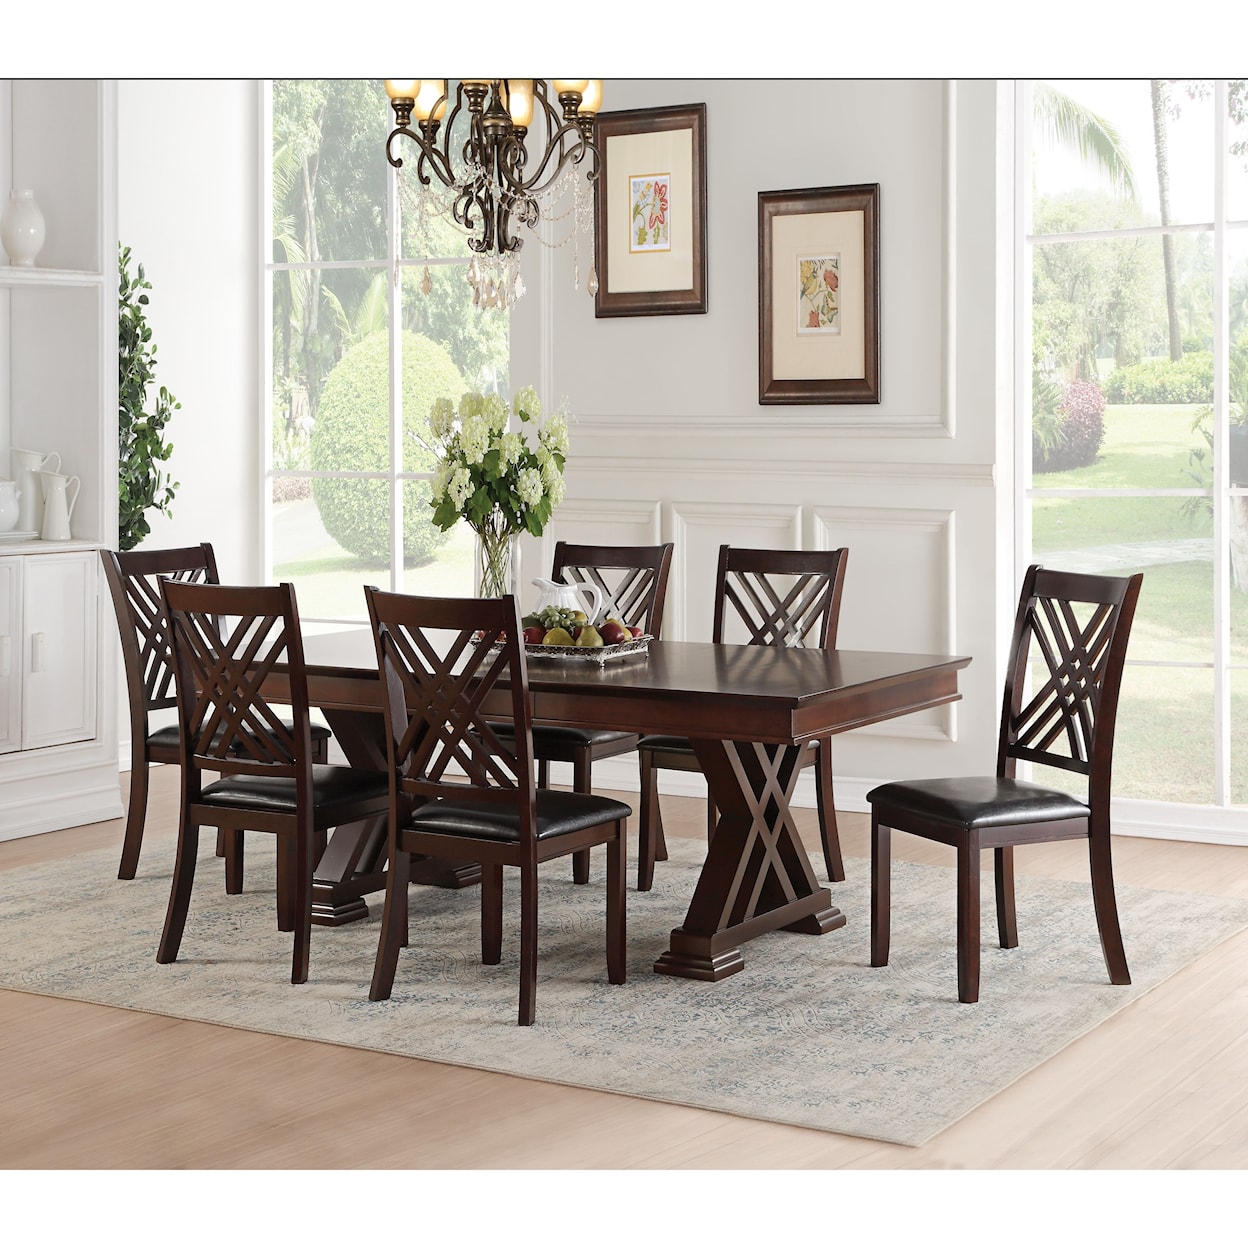 Acme Furniture Katrien Dining Set with 6 Side Chairs